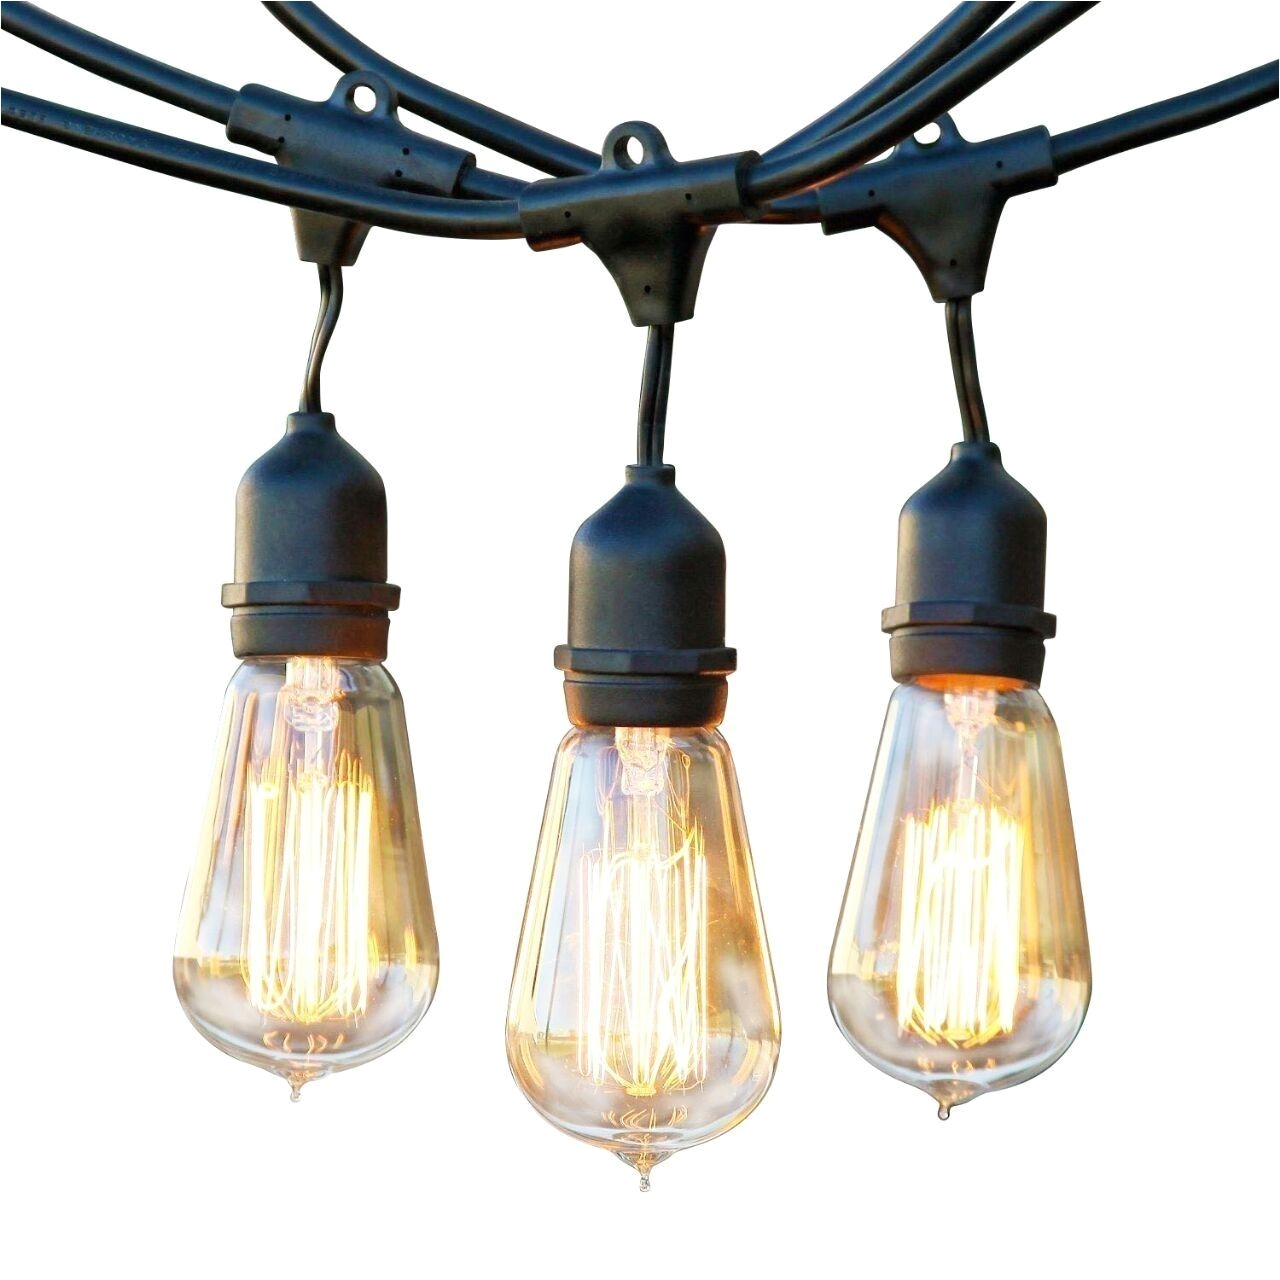 48 ft ambience pro hanging outdoor string lights vintage edition with nostalgic edison incandescent bulbs